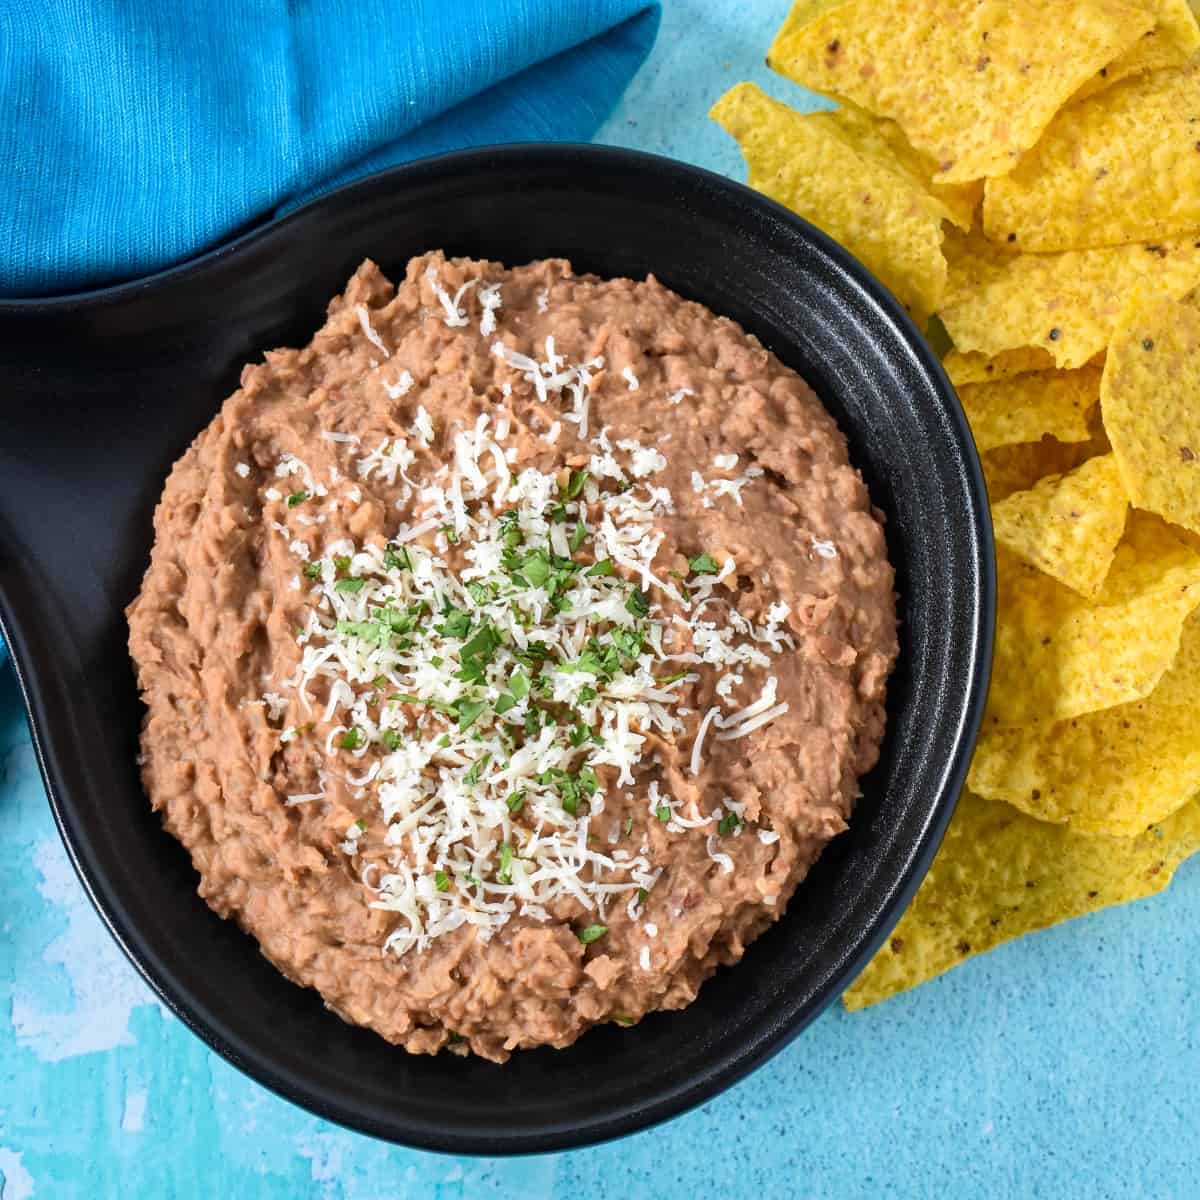 Refried beans served in a black serving skillet with corn tortilla chips to the right and an aqua colored linen set on a light blue board.